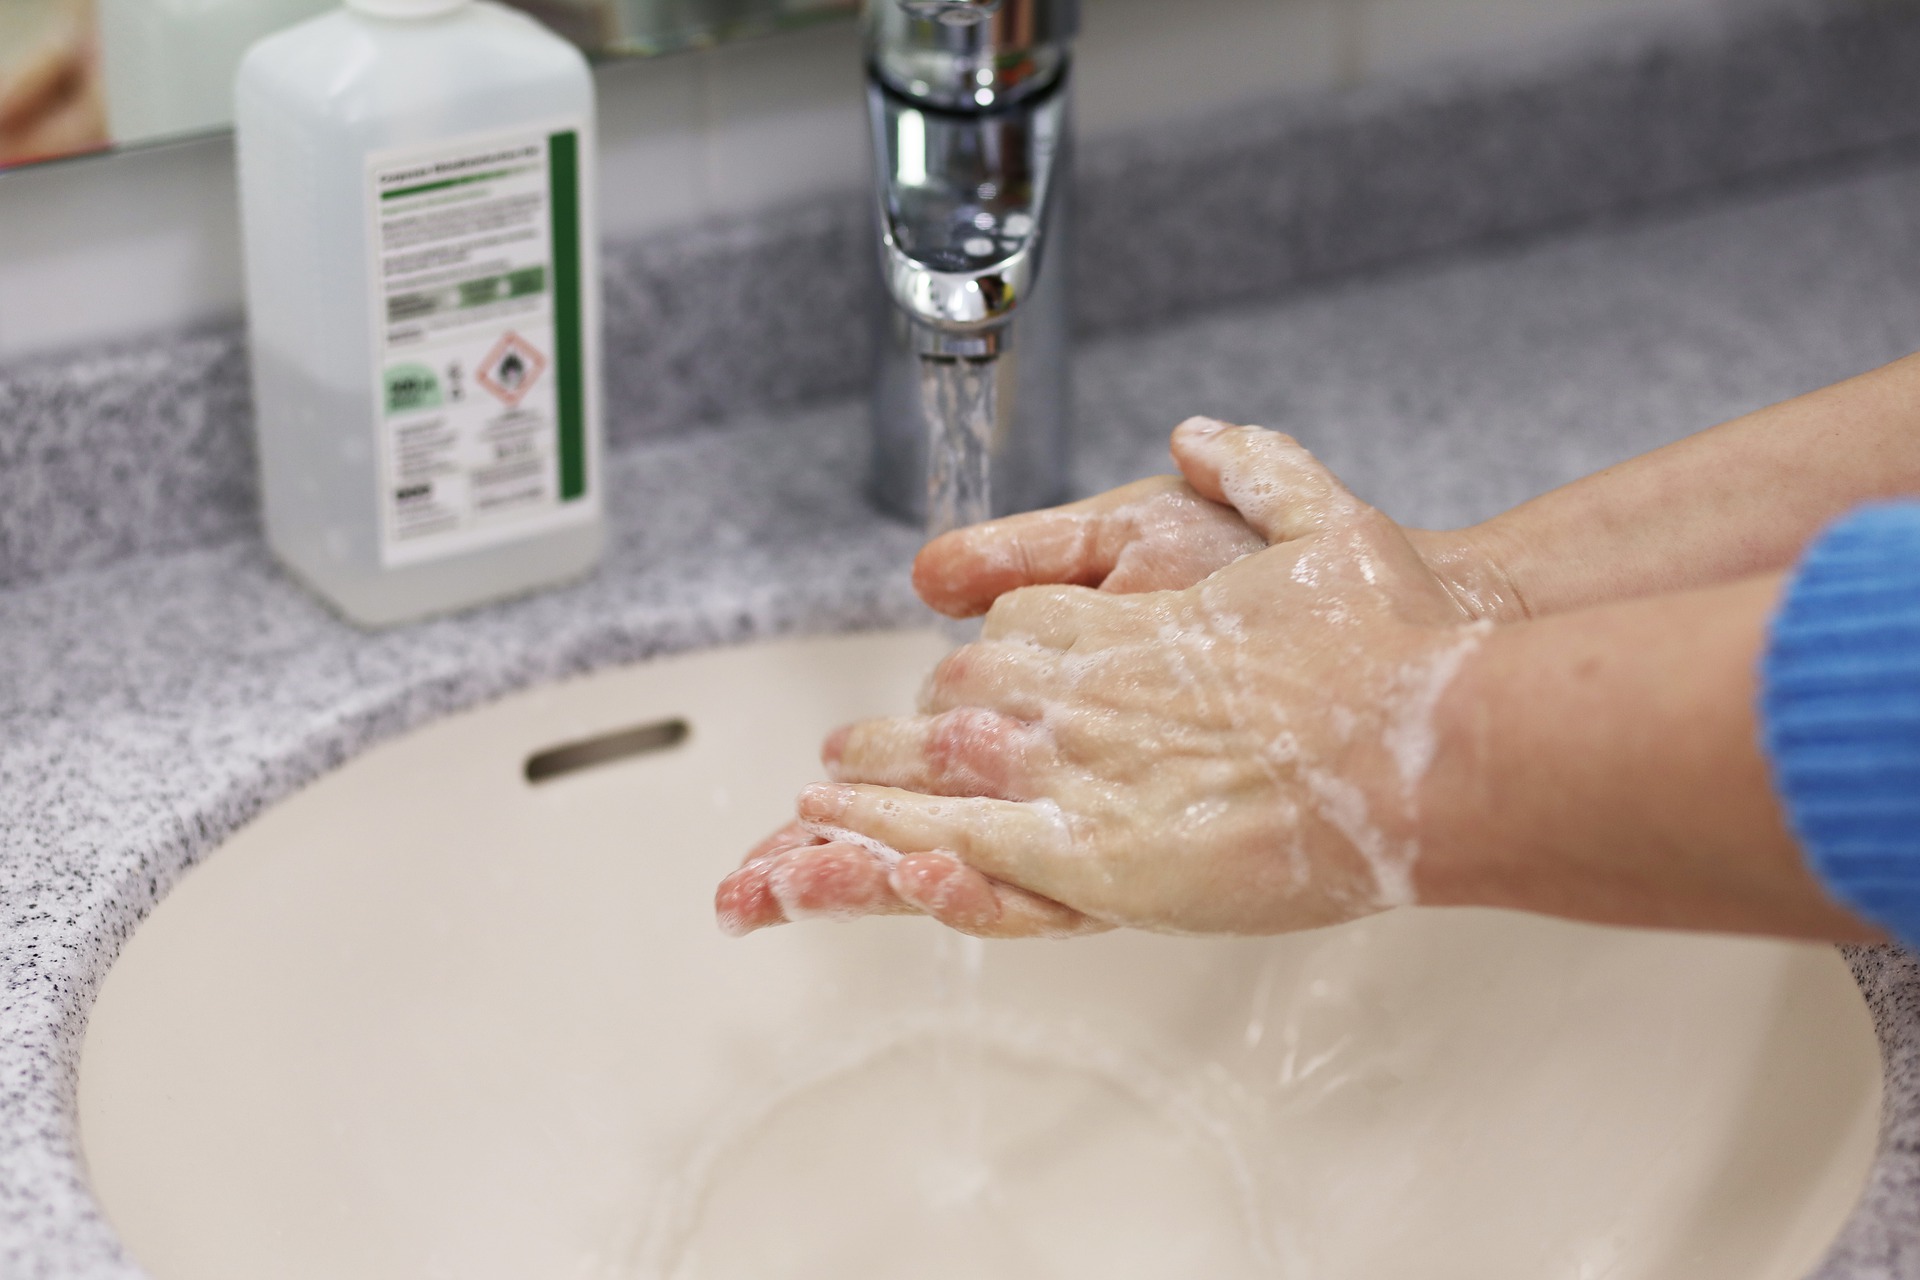 Advice on dry skin and handwashing frequently